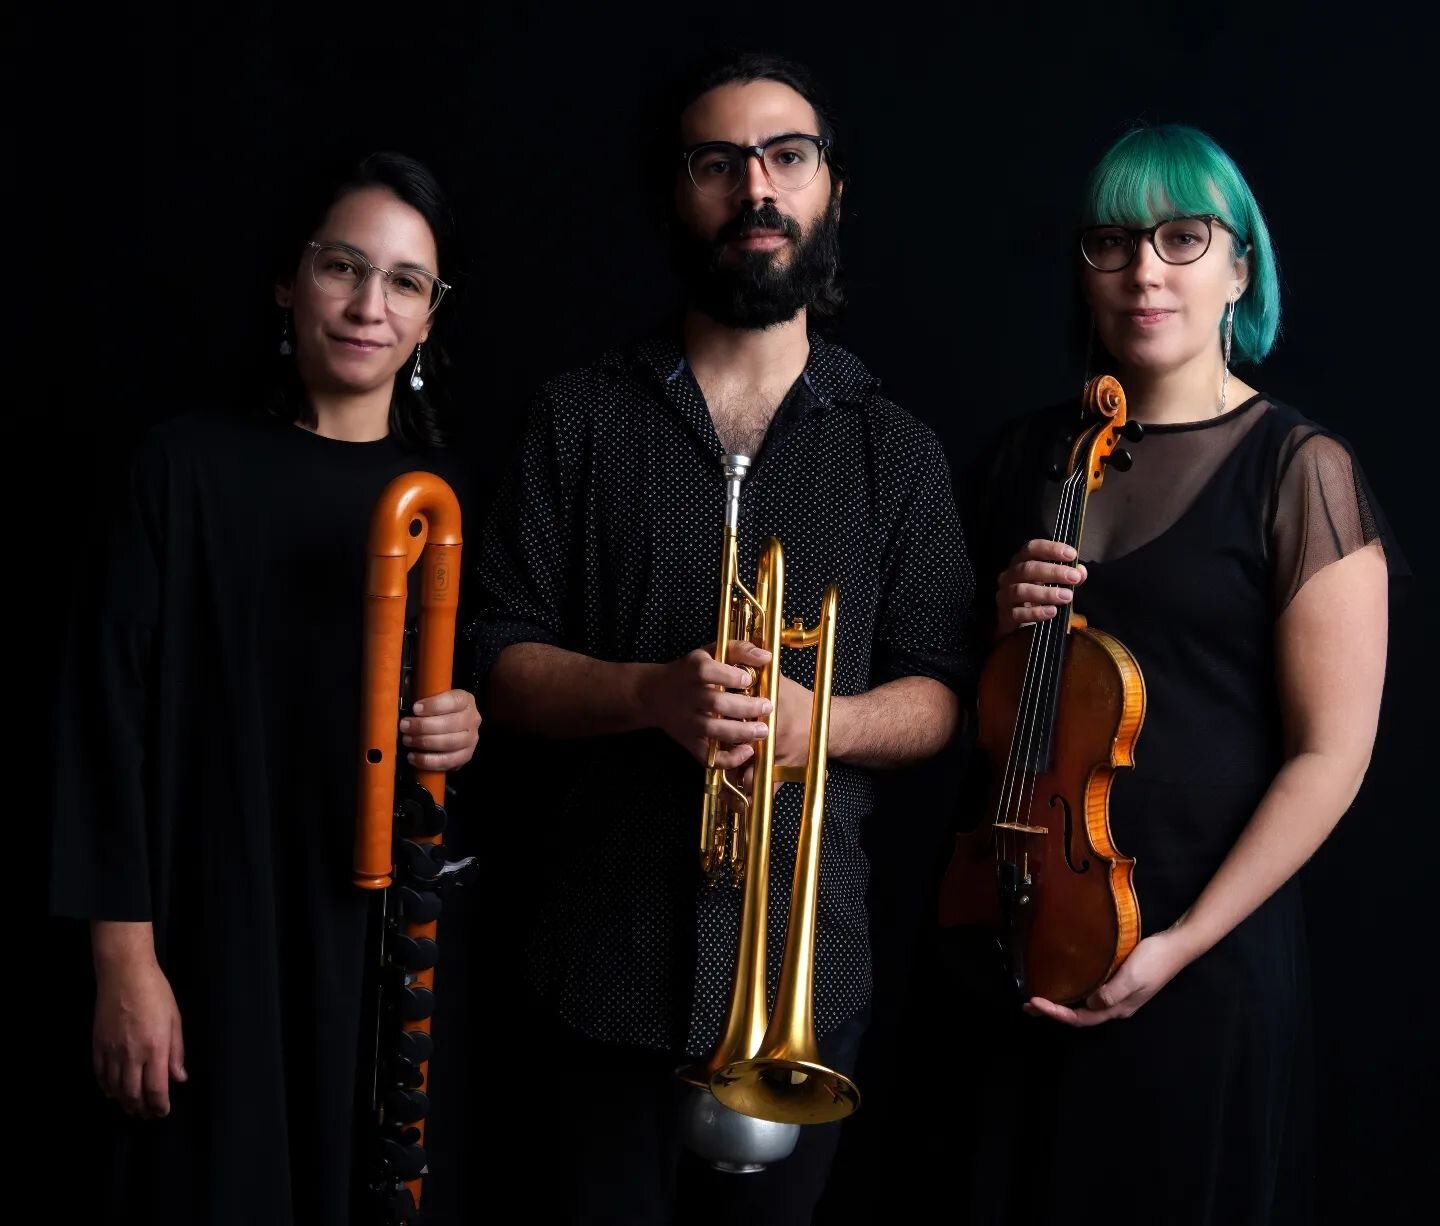 We are elated to present our concert program Tangible Mechanics this week in Mexico City. Music by Wilfrido Terrazas, @micaelamiau and each member of in^set: @teresa.ddcs @ilanawaniuk @daviduhgeela 
&bull;
&bull;
&bull;
#Flute #Violin #Trumpet #conte